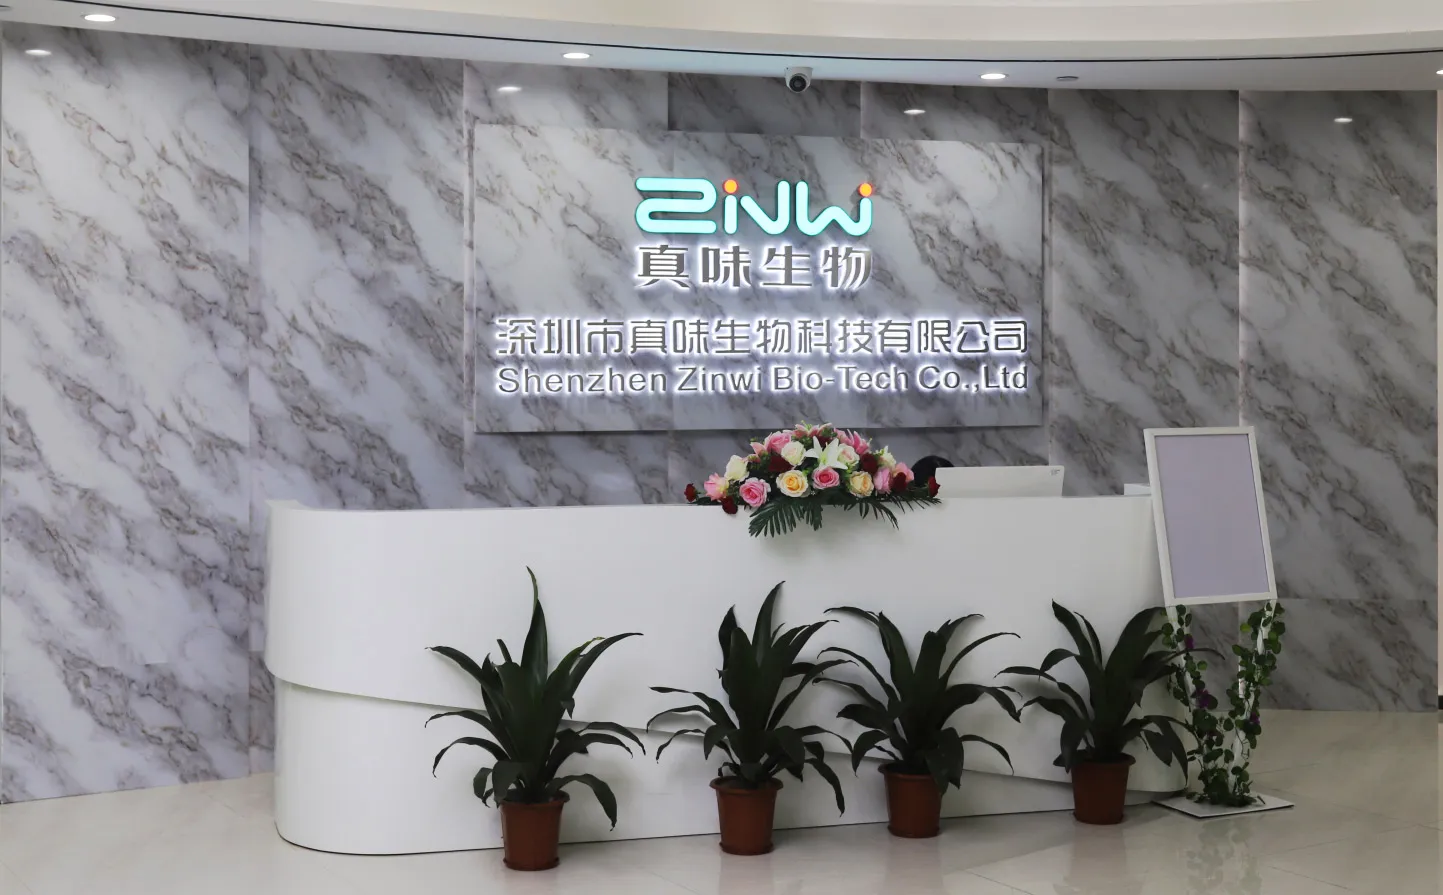 Shenzhen Zinwi Biotech-tech Co., Ltd. is a high-tech company that integrates tobacco product technology research and development, production, sales, and service into a full industrial chain.